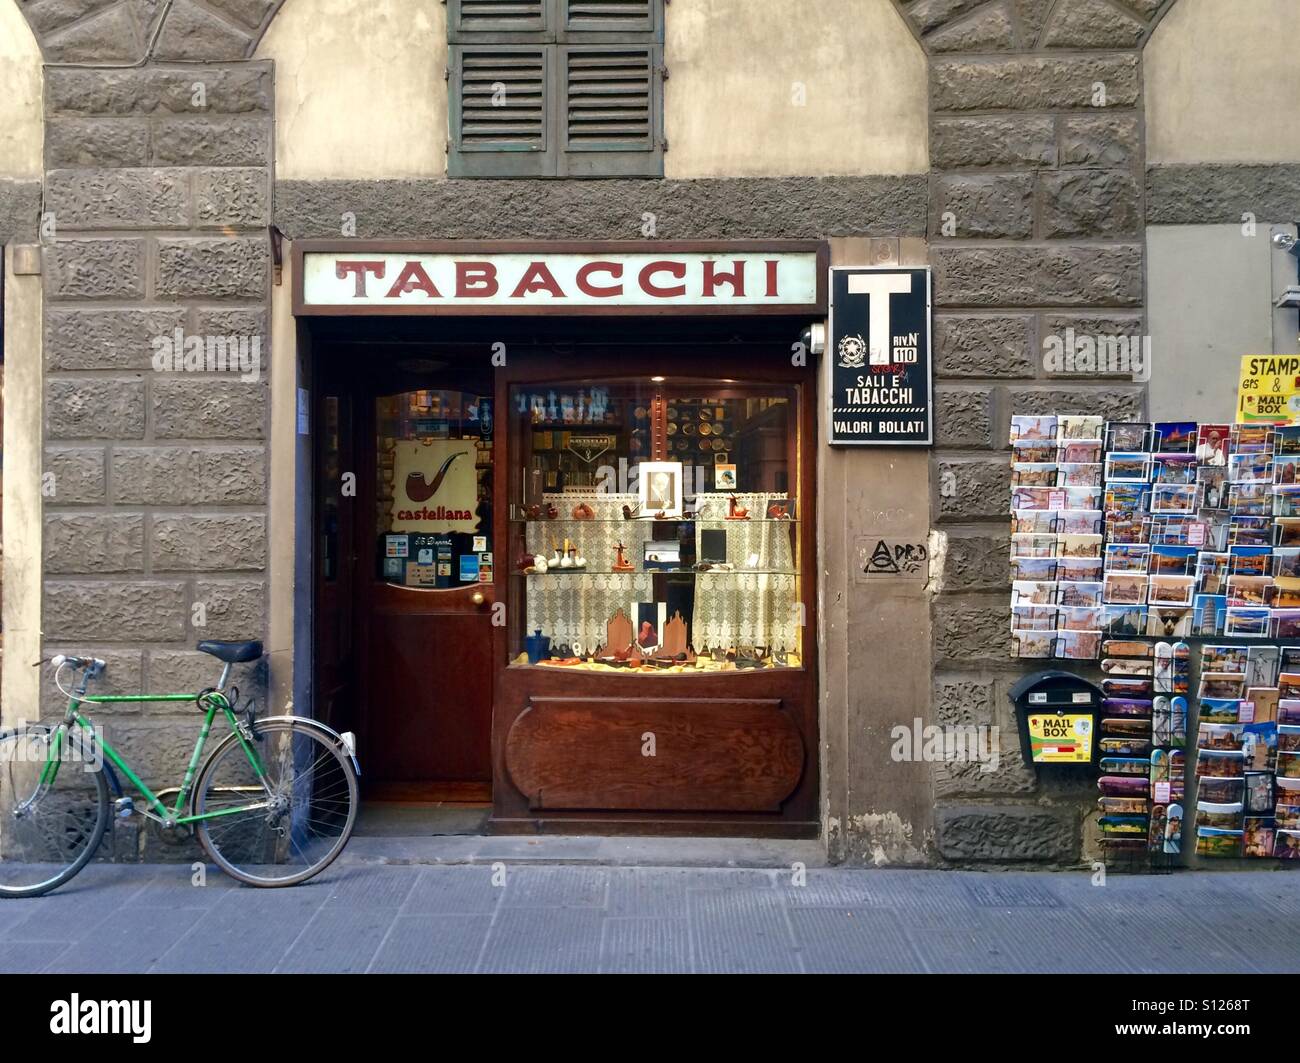 Tabacchi store in Italy Stock Photo